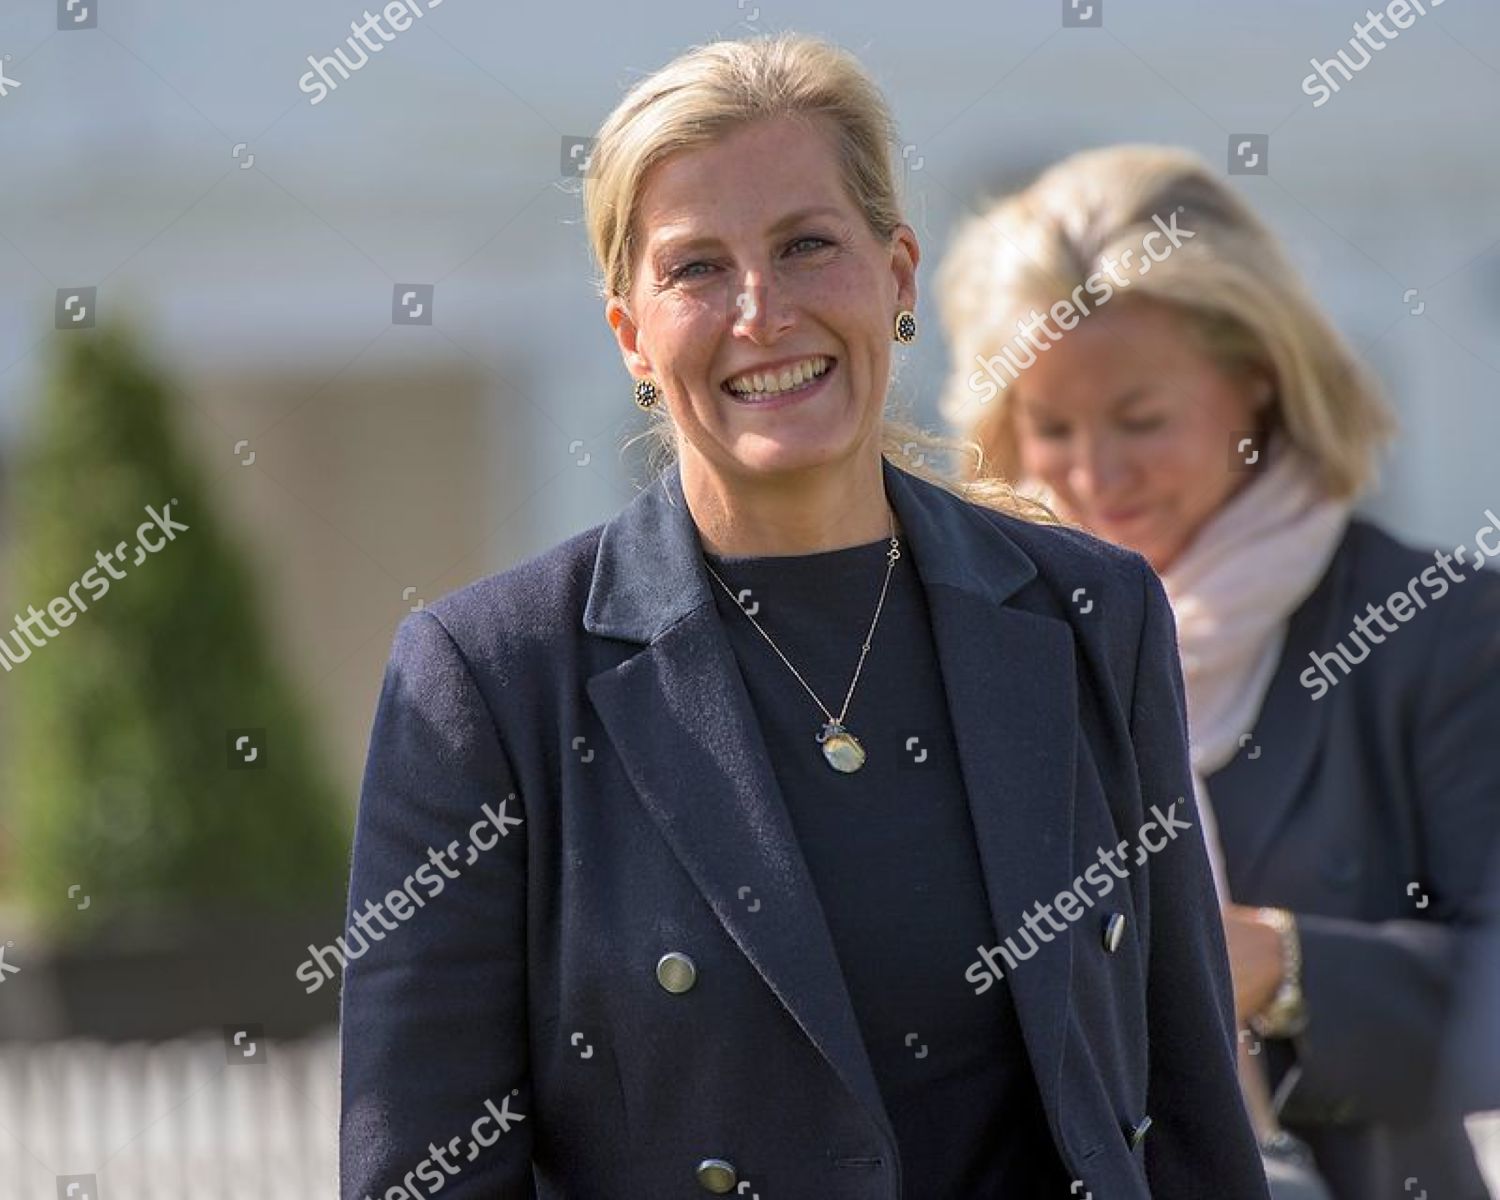 the-land-rover-burghley-horse-trials-shutterstock-editorial-10404458d.jpg